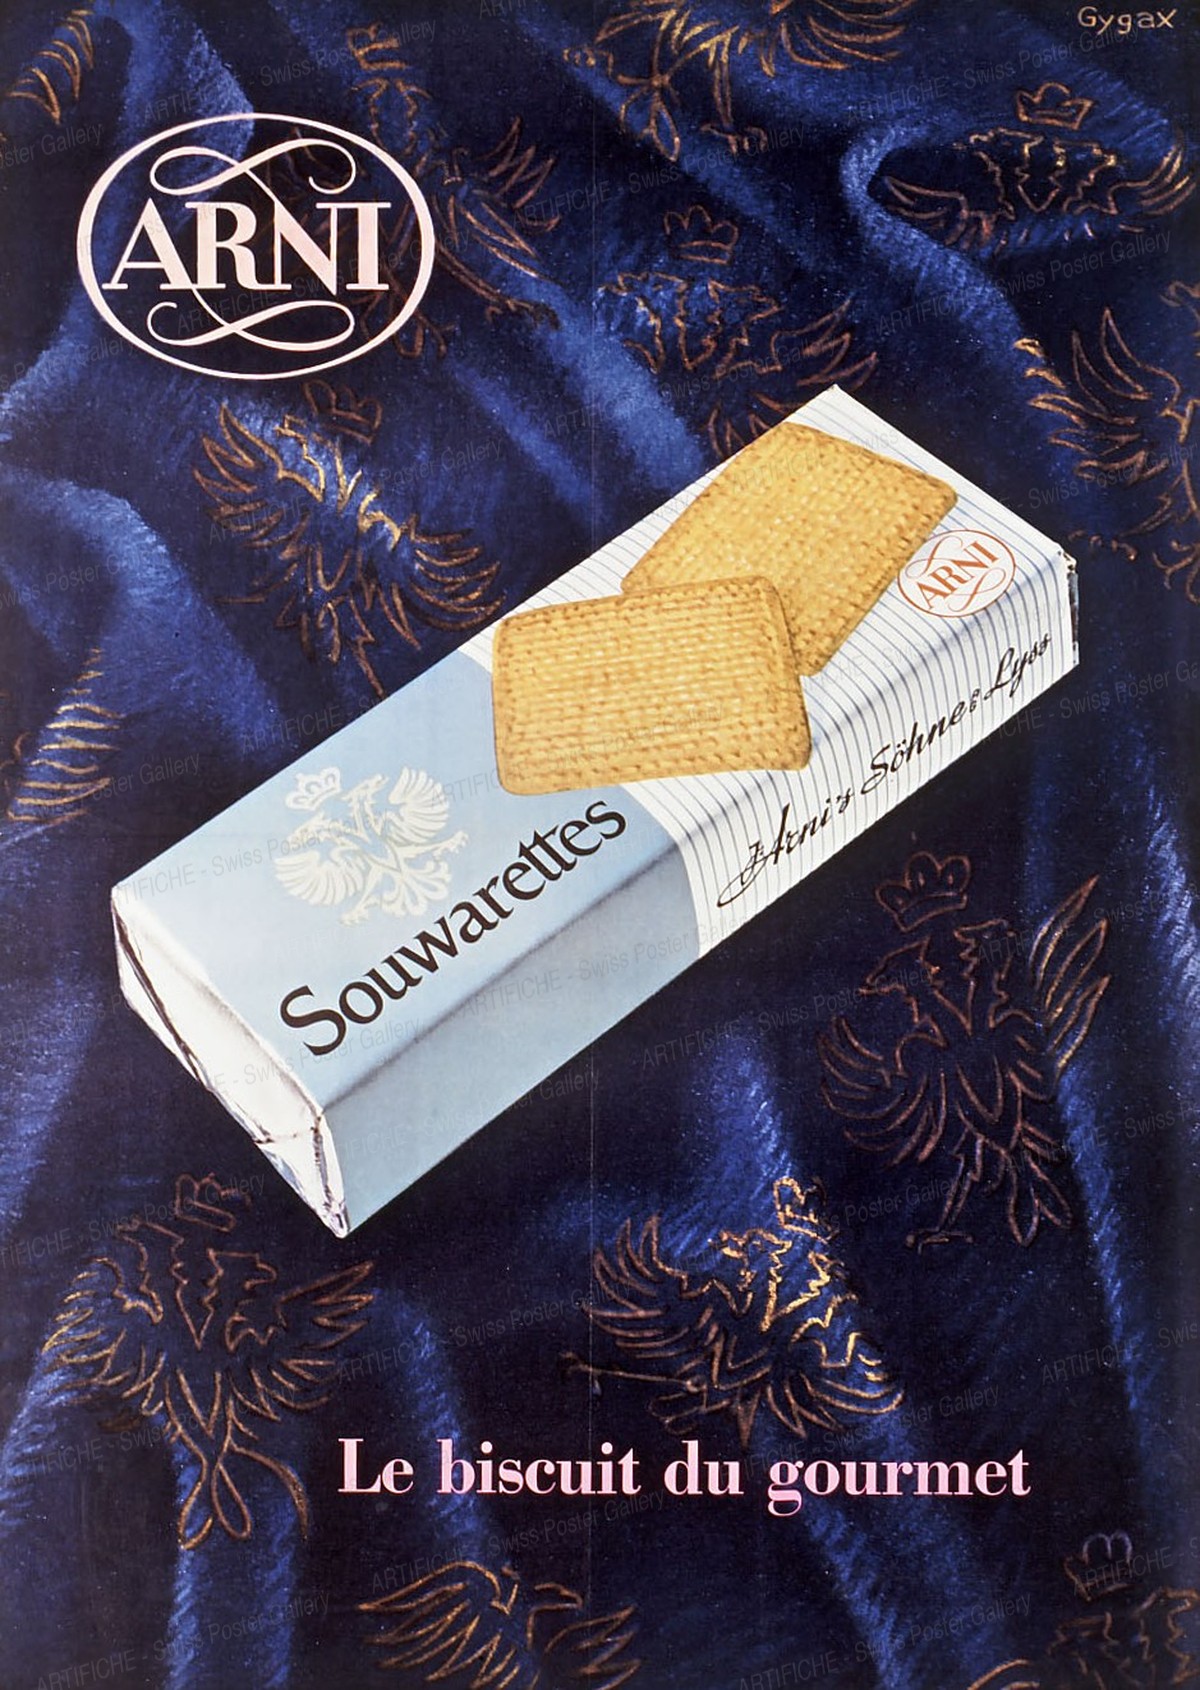 ARNIT – The gourmet biscuit, Franz Gygax